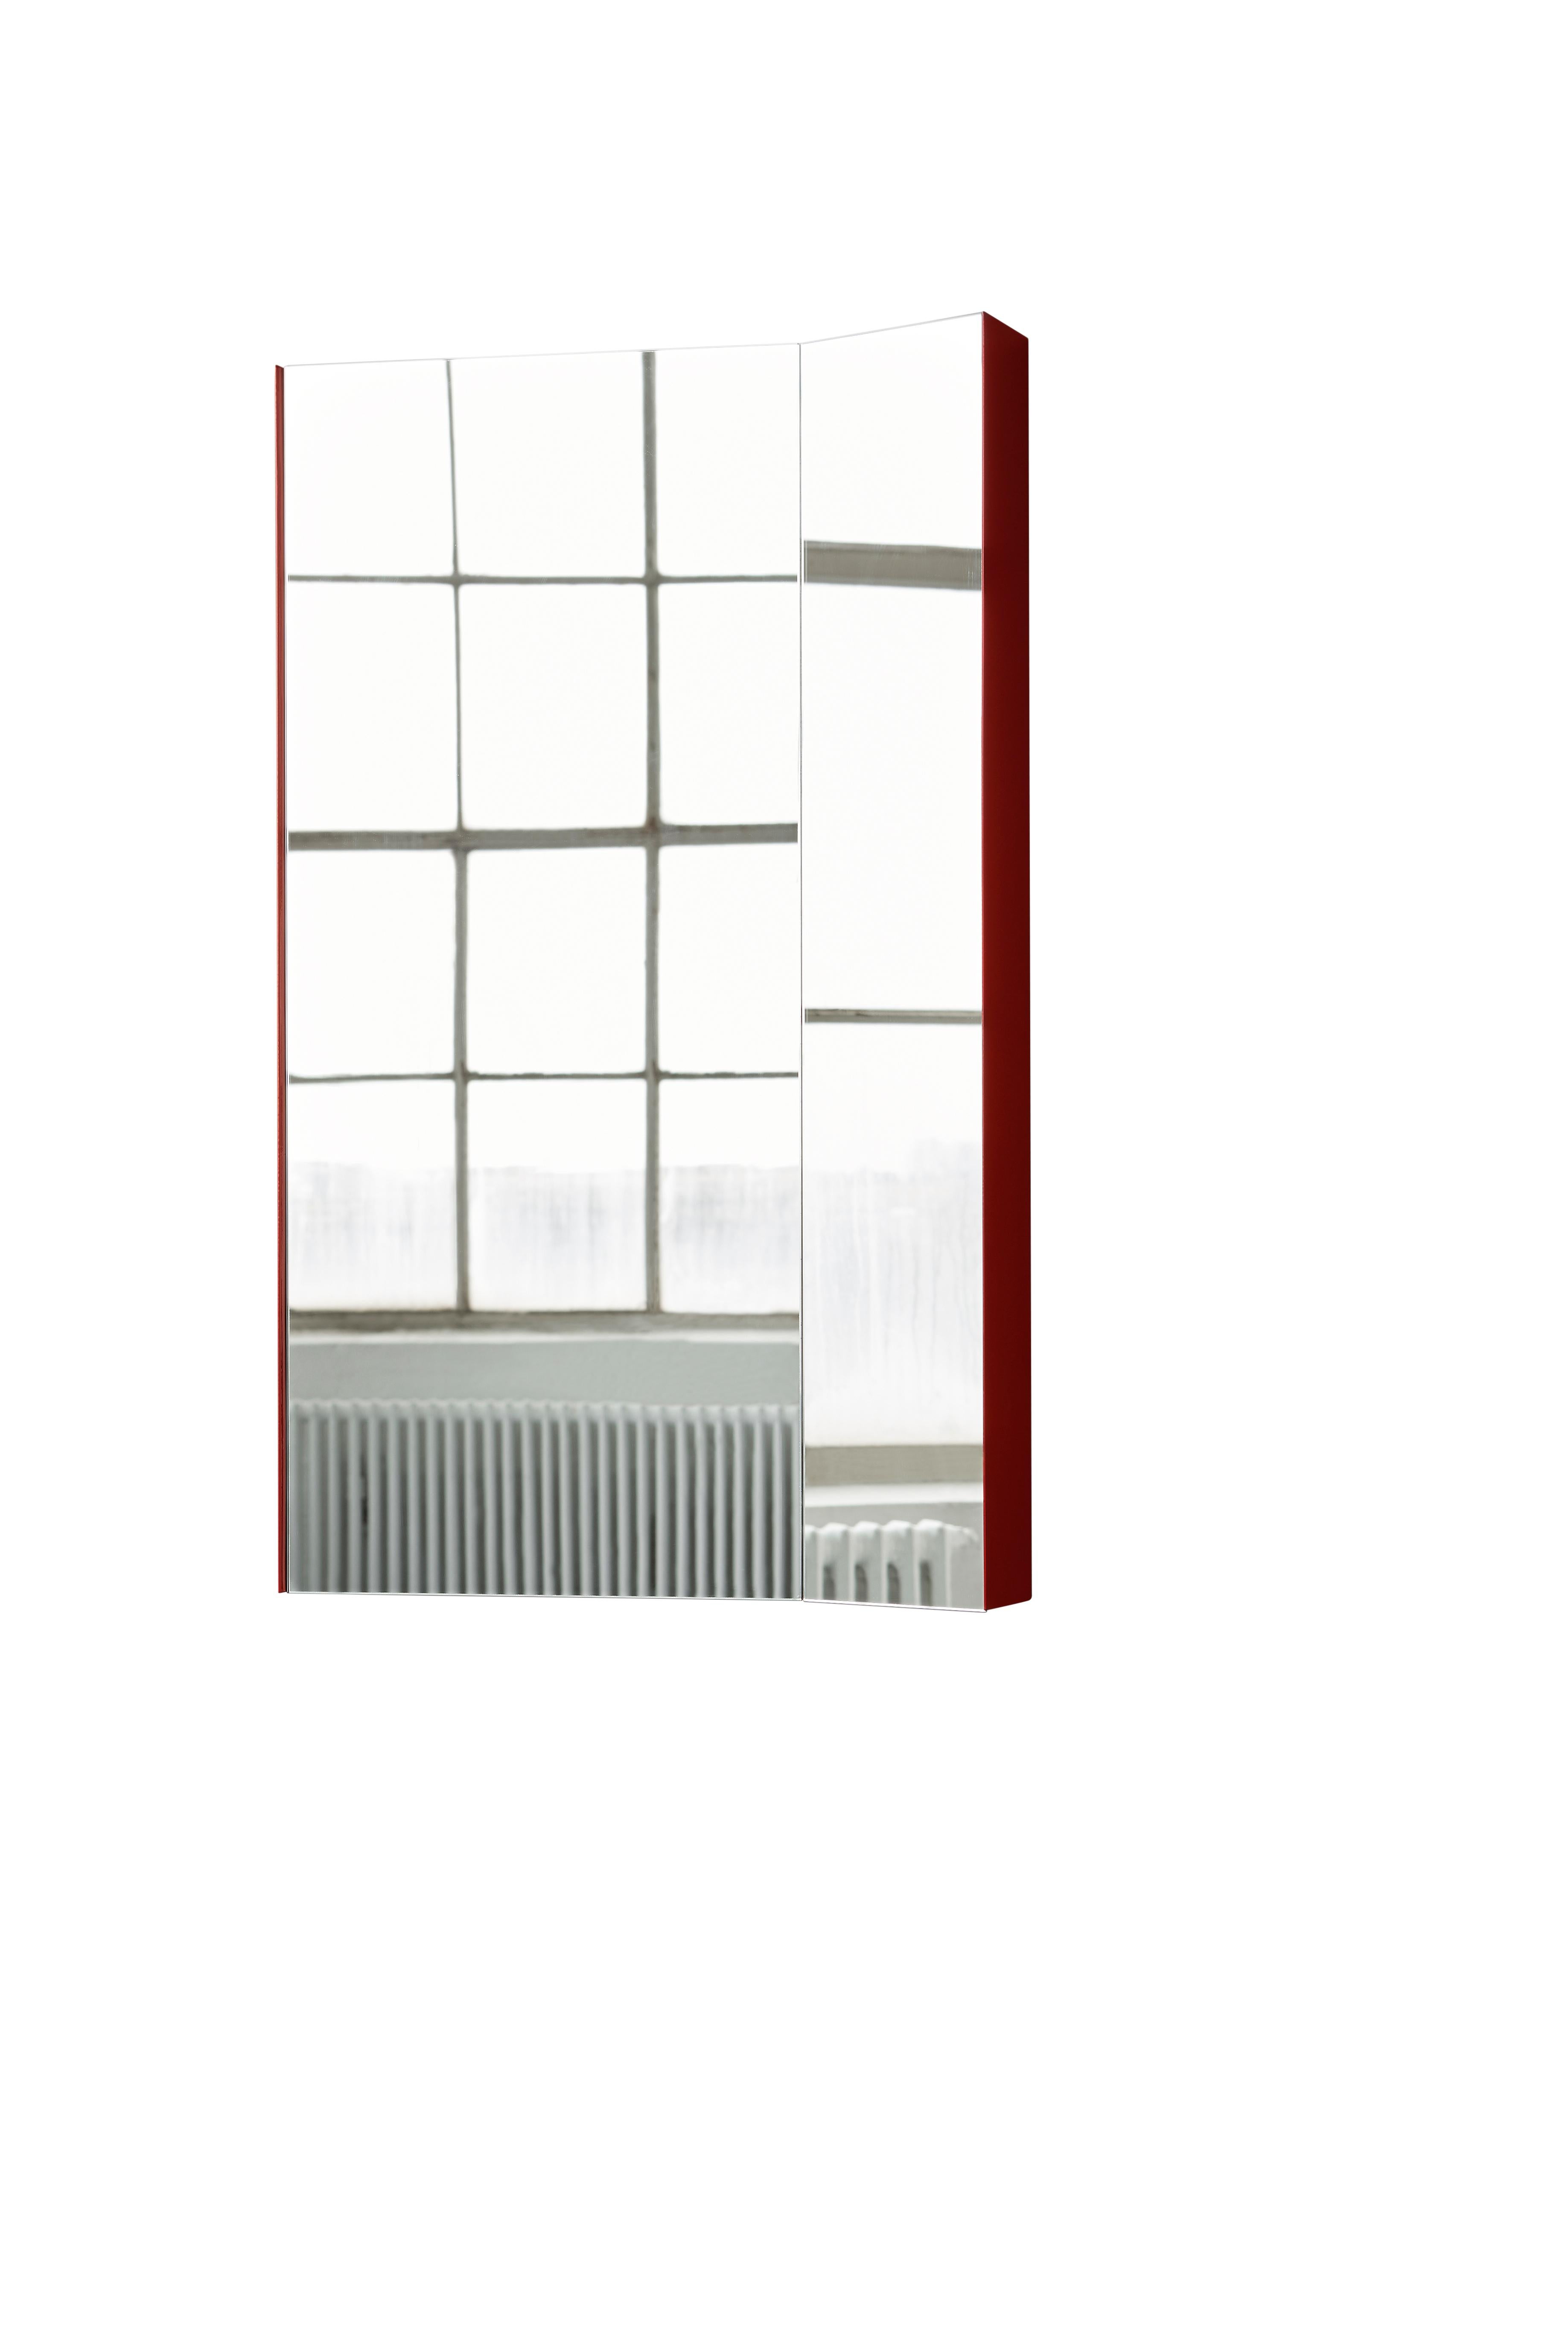 For Sale: Red (Basque Red) Mimesis Planar Floor or Wall Mirror in Powder Coated Steel